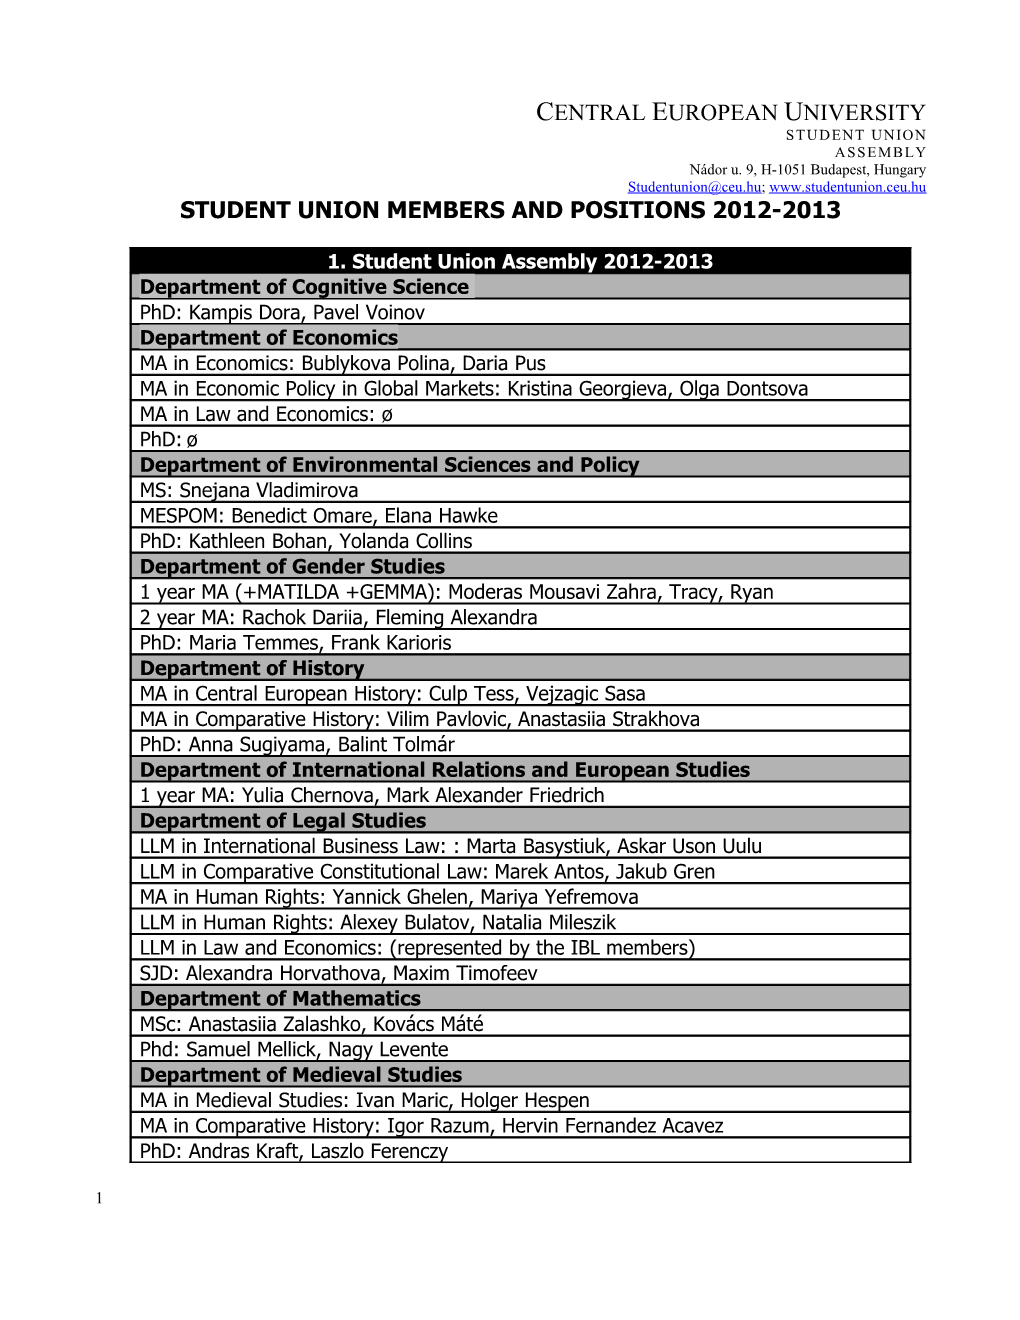 Student Union Members and Positions 2012-2013